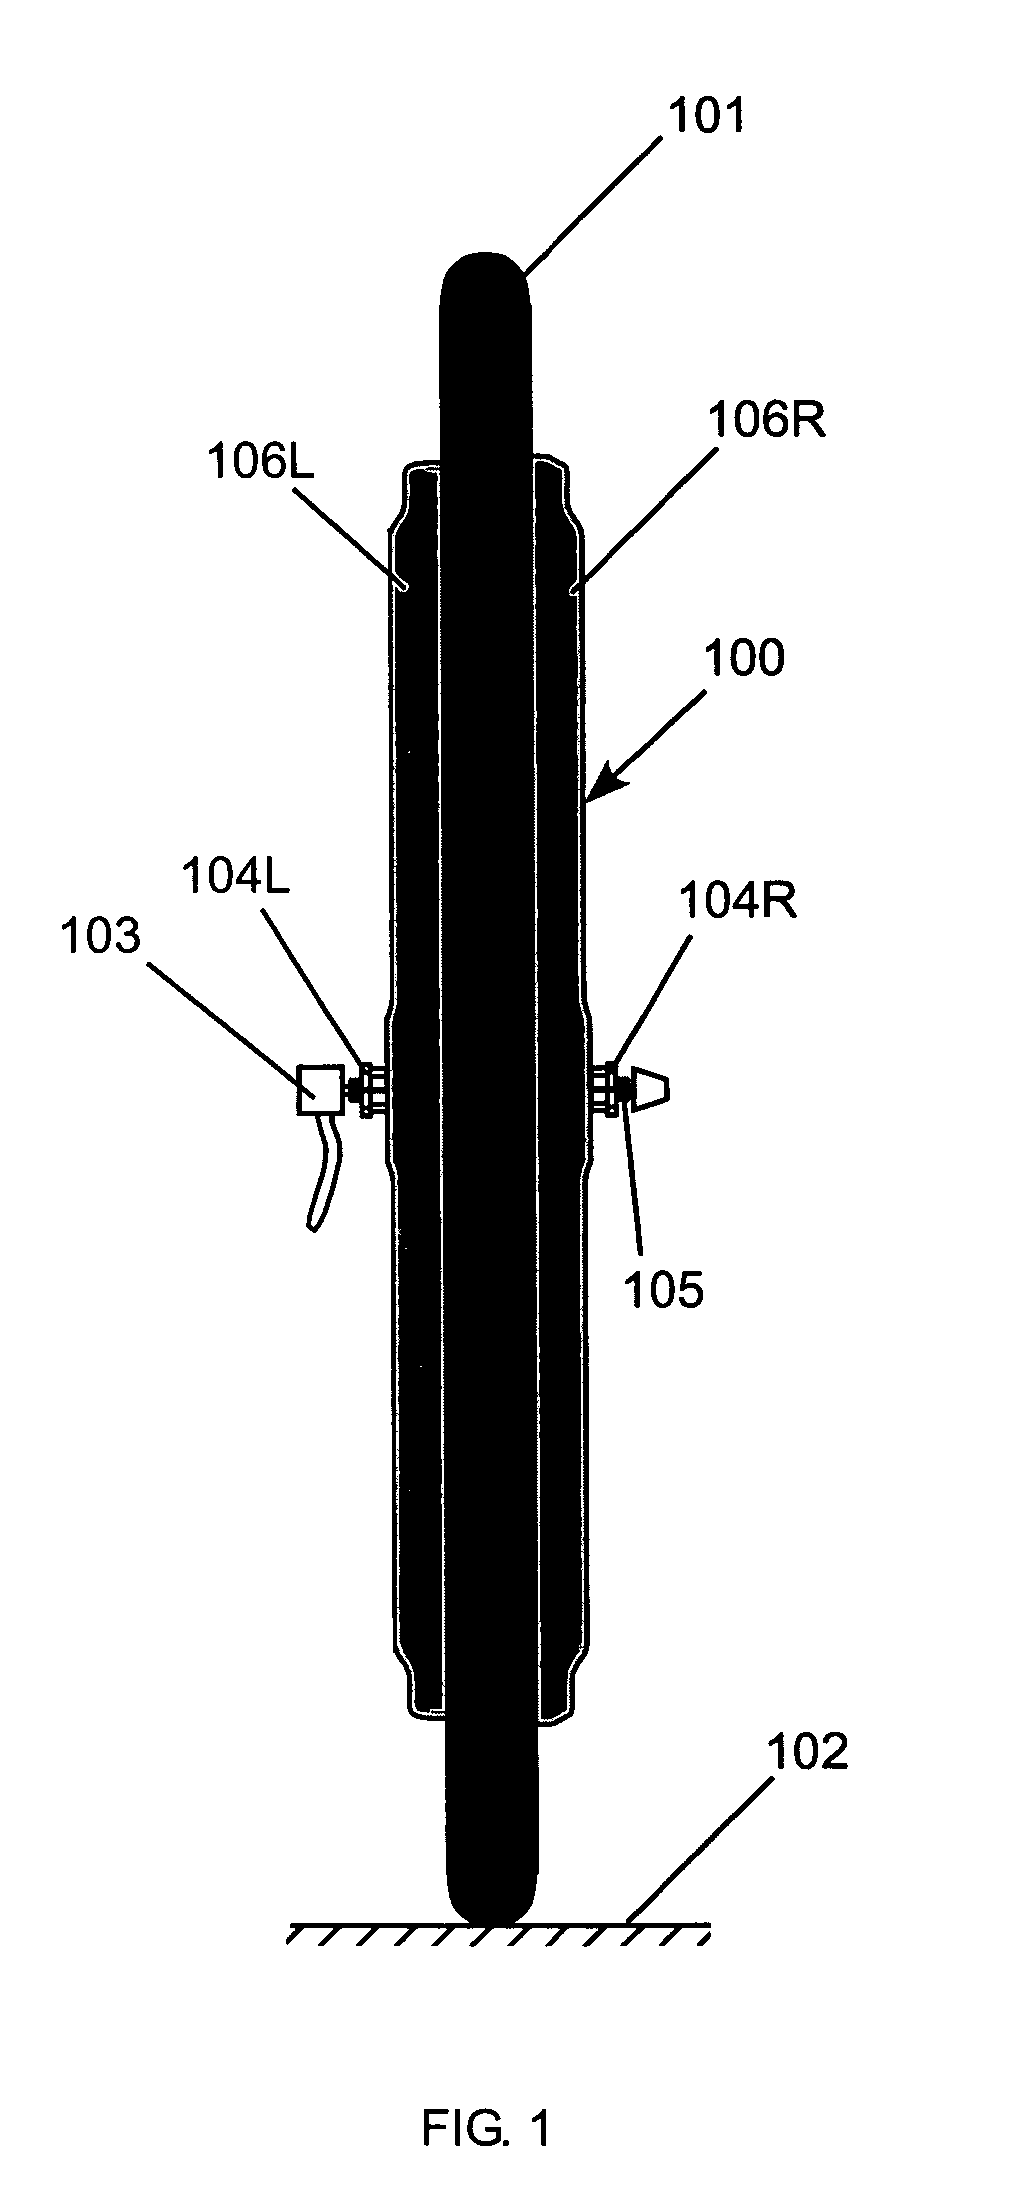 Self-propelled wheel for bicycles and similar vehicles